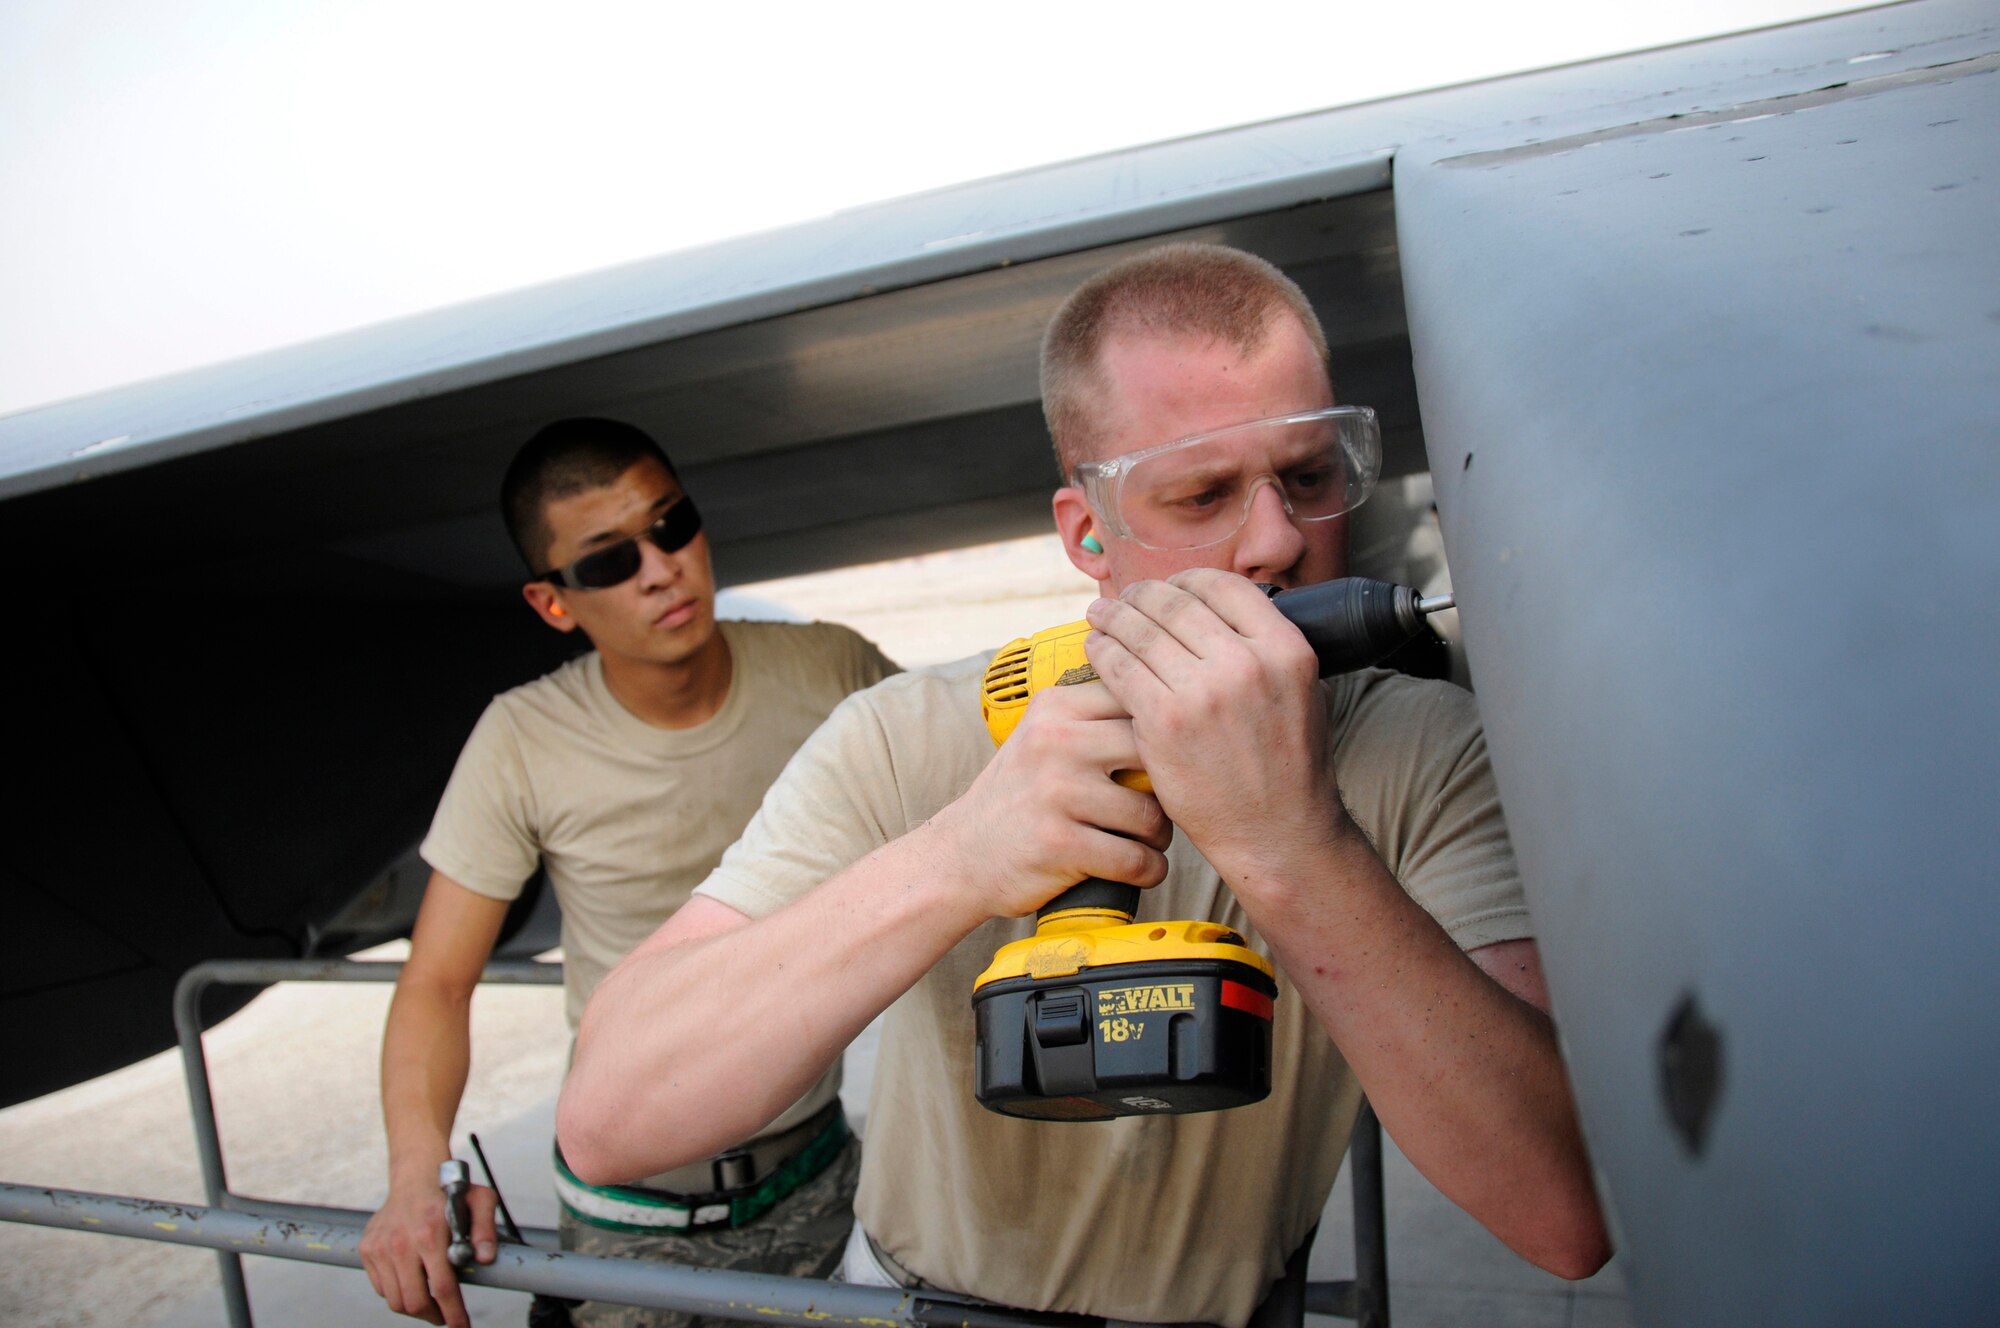 Senior Airman Mark McMichael gives total concentration to drilling out a stripped screw head while Airman 1st Class Matthew Enter stands ready to tap it out if necessary, October 17, 2008, at an undisclosed air base in Southwest Asia.  Both Airmen are deployed to the 379th Expeditionary Maintenance Squadron in support of Operations Iraqi and Enduring Freedom and Joint Task Force-Horn of Africa.  The bad screws are being removed so the crew chiefs can pull the panel and do maintenance on a C-17 Globemaster III.  Airman McMichael, a native of Denver, Colo., is deployed from Charleston Air Force Base, S.C., and Airman Enter, a native of Rochester, N.Y., is deployed from Fairchild AFB, Wash.  (U.S. Air Force photo by Tech. Sgt. Michael Boquette/Released)